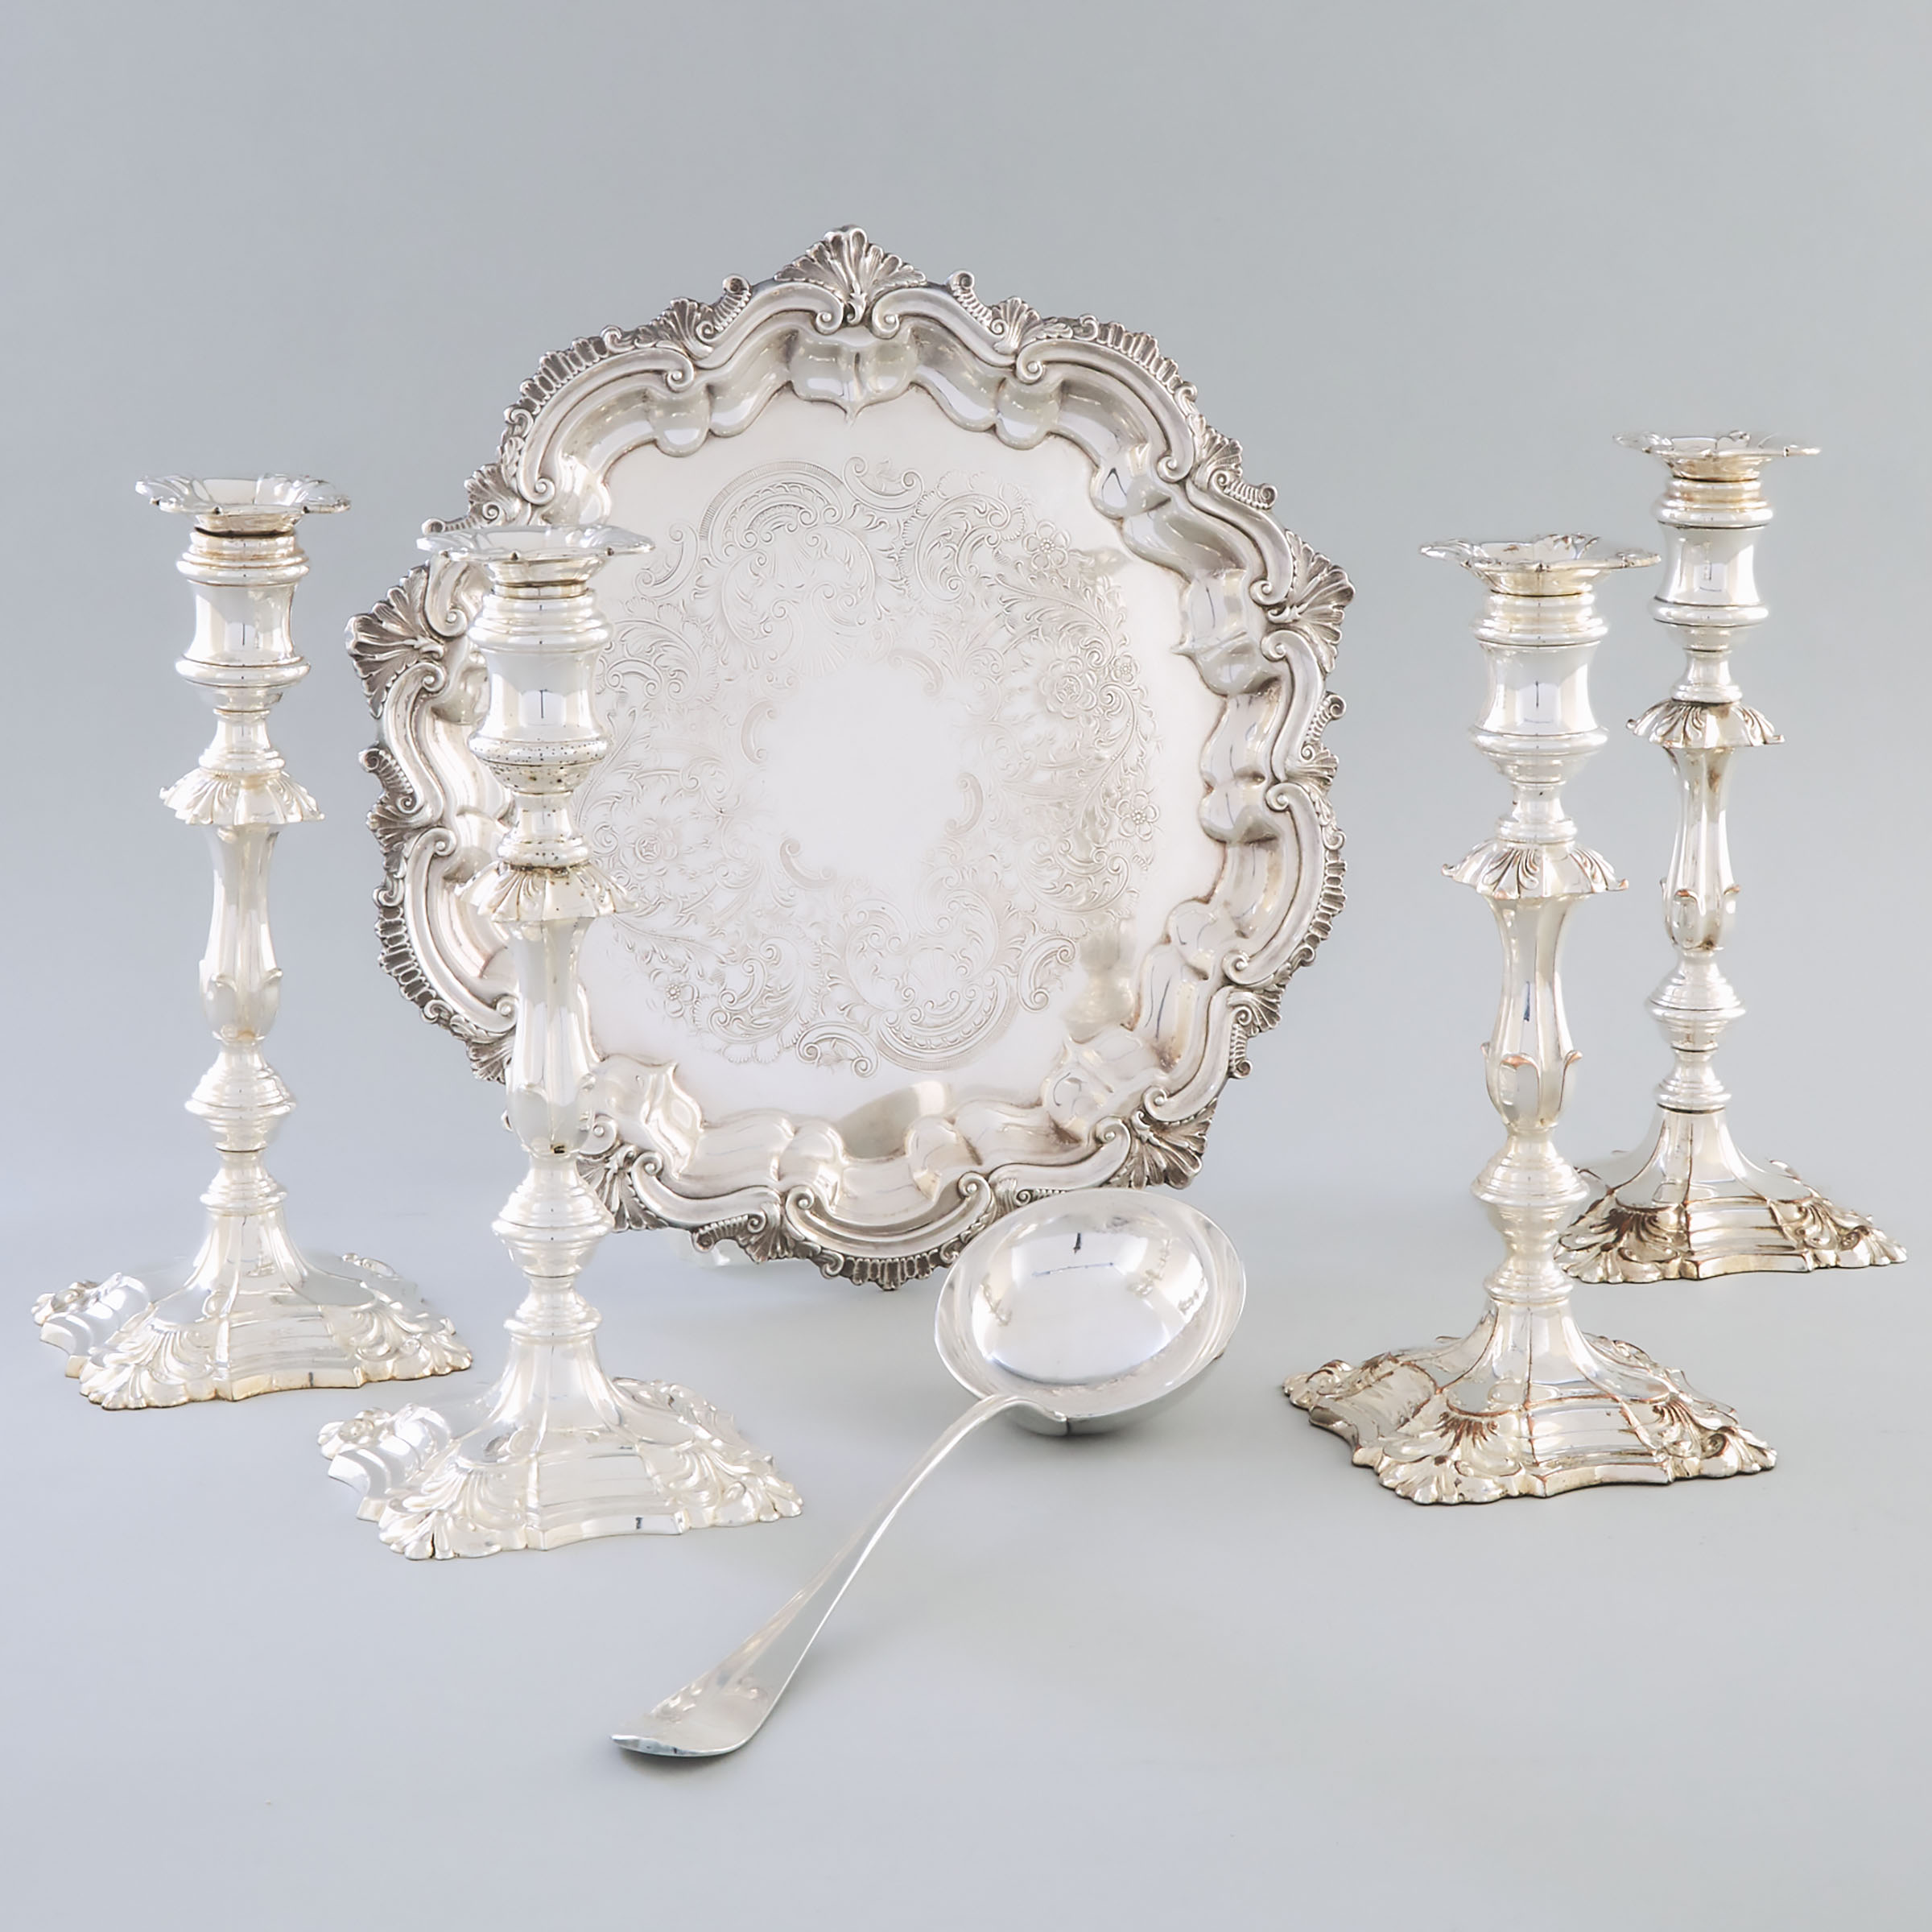 Set of Four English Silver Plated Table Candlesticks, Shaped Circular Salver and a Christofle Soup Ladle, 20th century